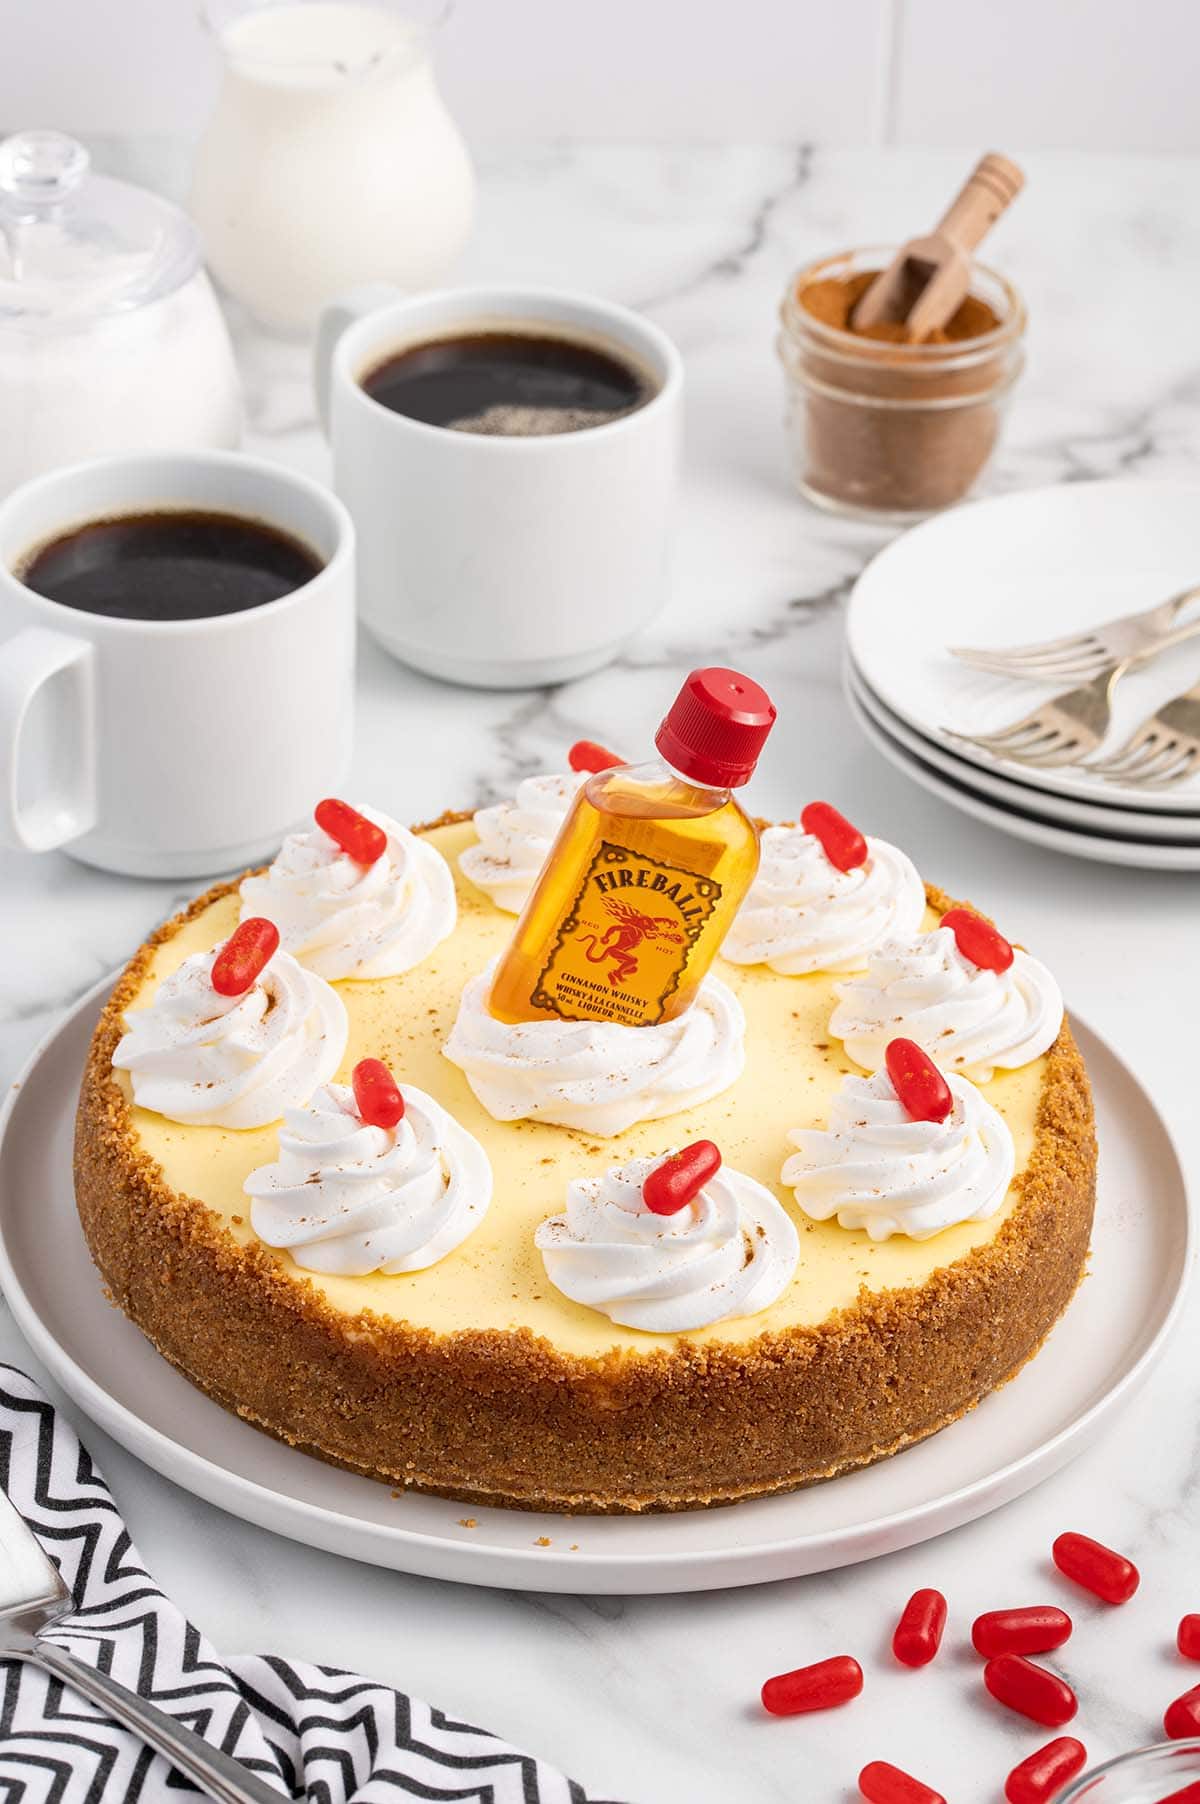 Fireball Cheesecake on a white table with small fireball whiskey bottle on top of the cheesecake.